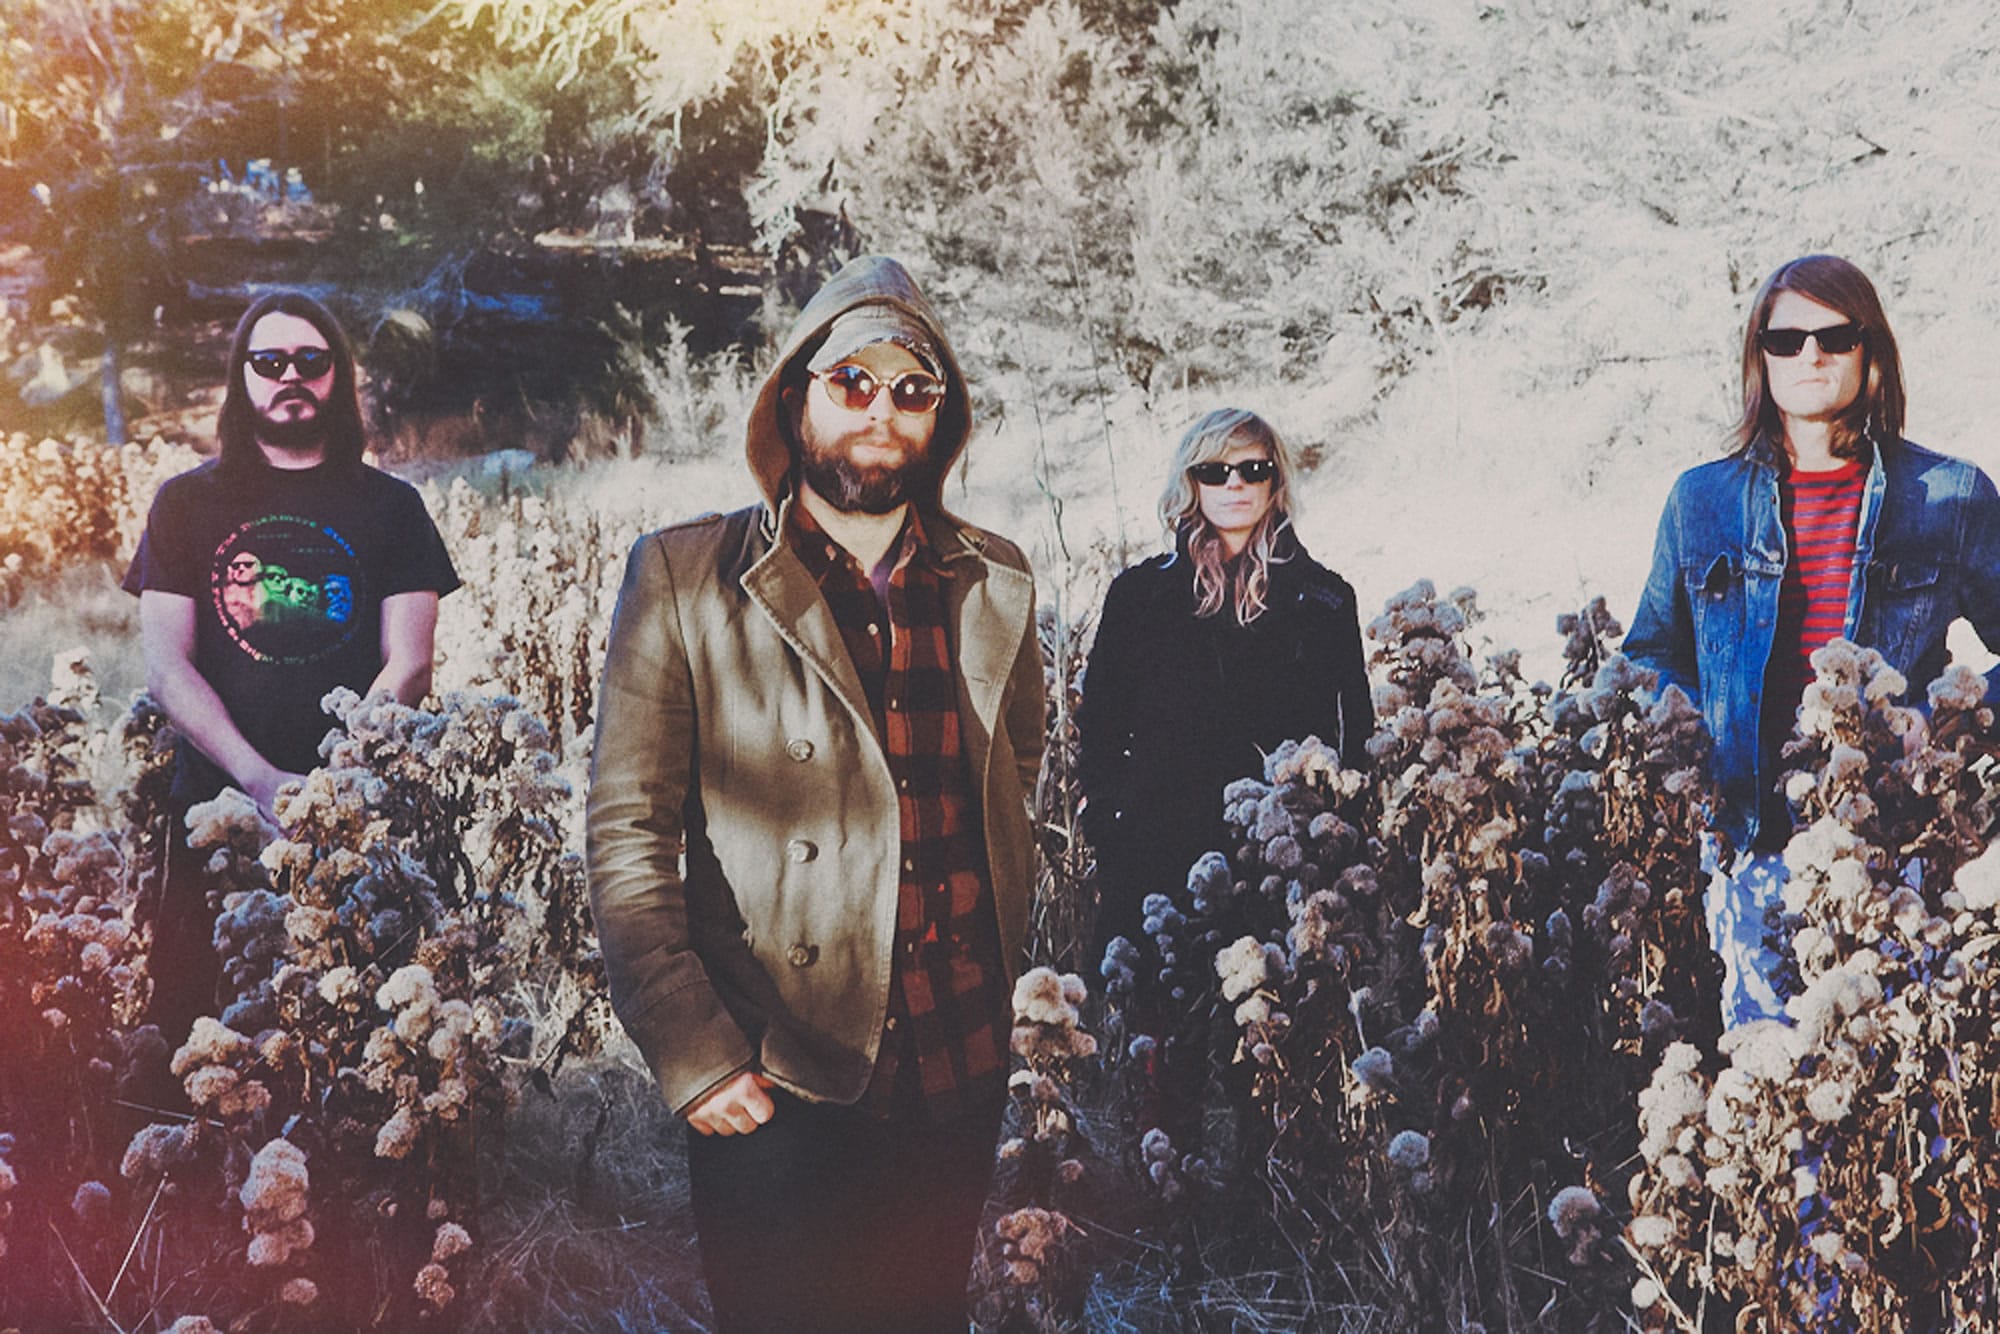 Pychedelic rock band The Black Angels will perform May 15, at the Wonder Ballroom in Portland.